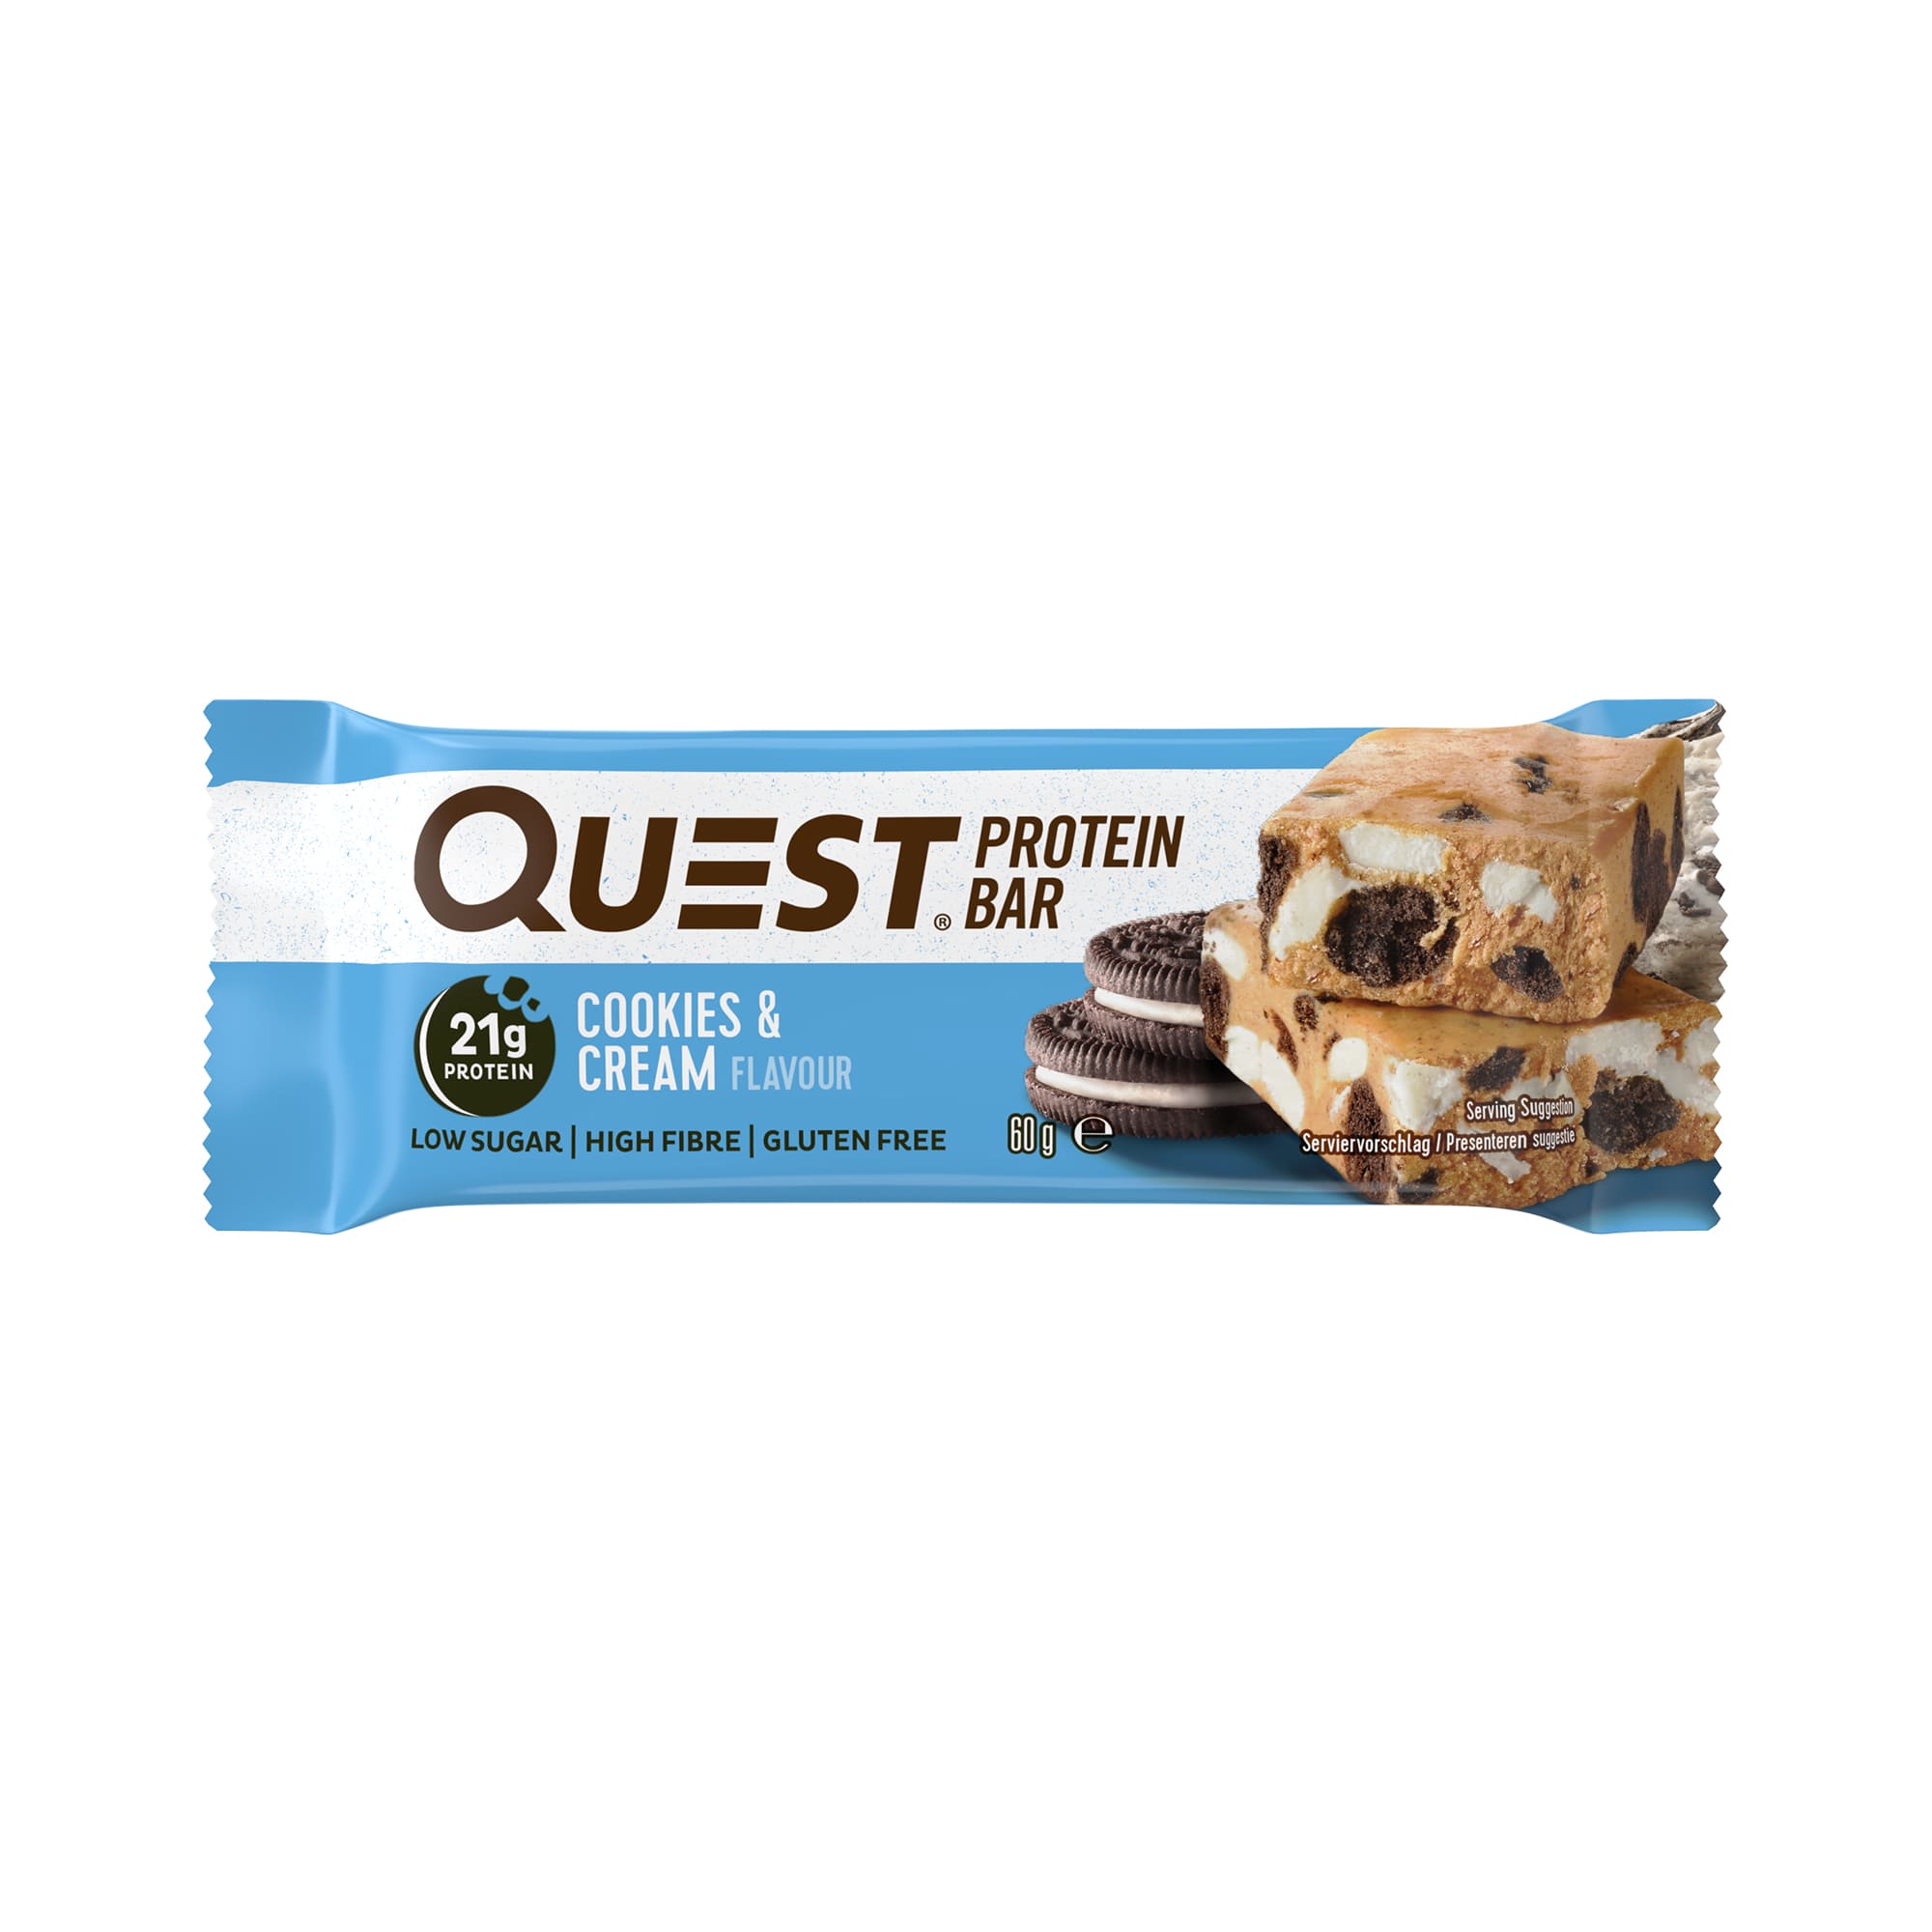 Quest cookie. QUESTBAR от Quest Nutrition. Квест бар батончики. Quest Protein Bar печенье. Quest Nutrition Quest Bar.